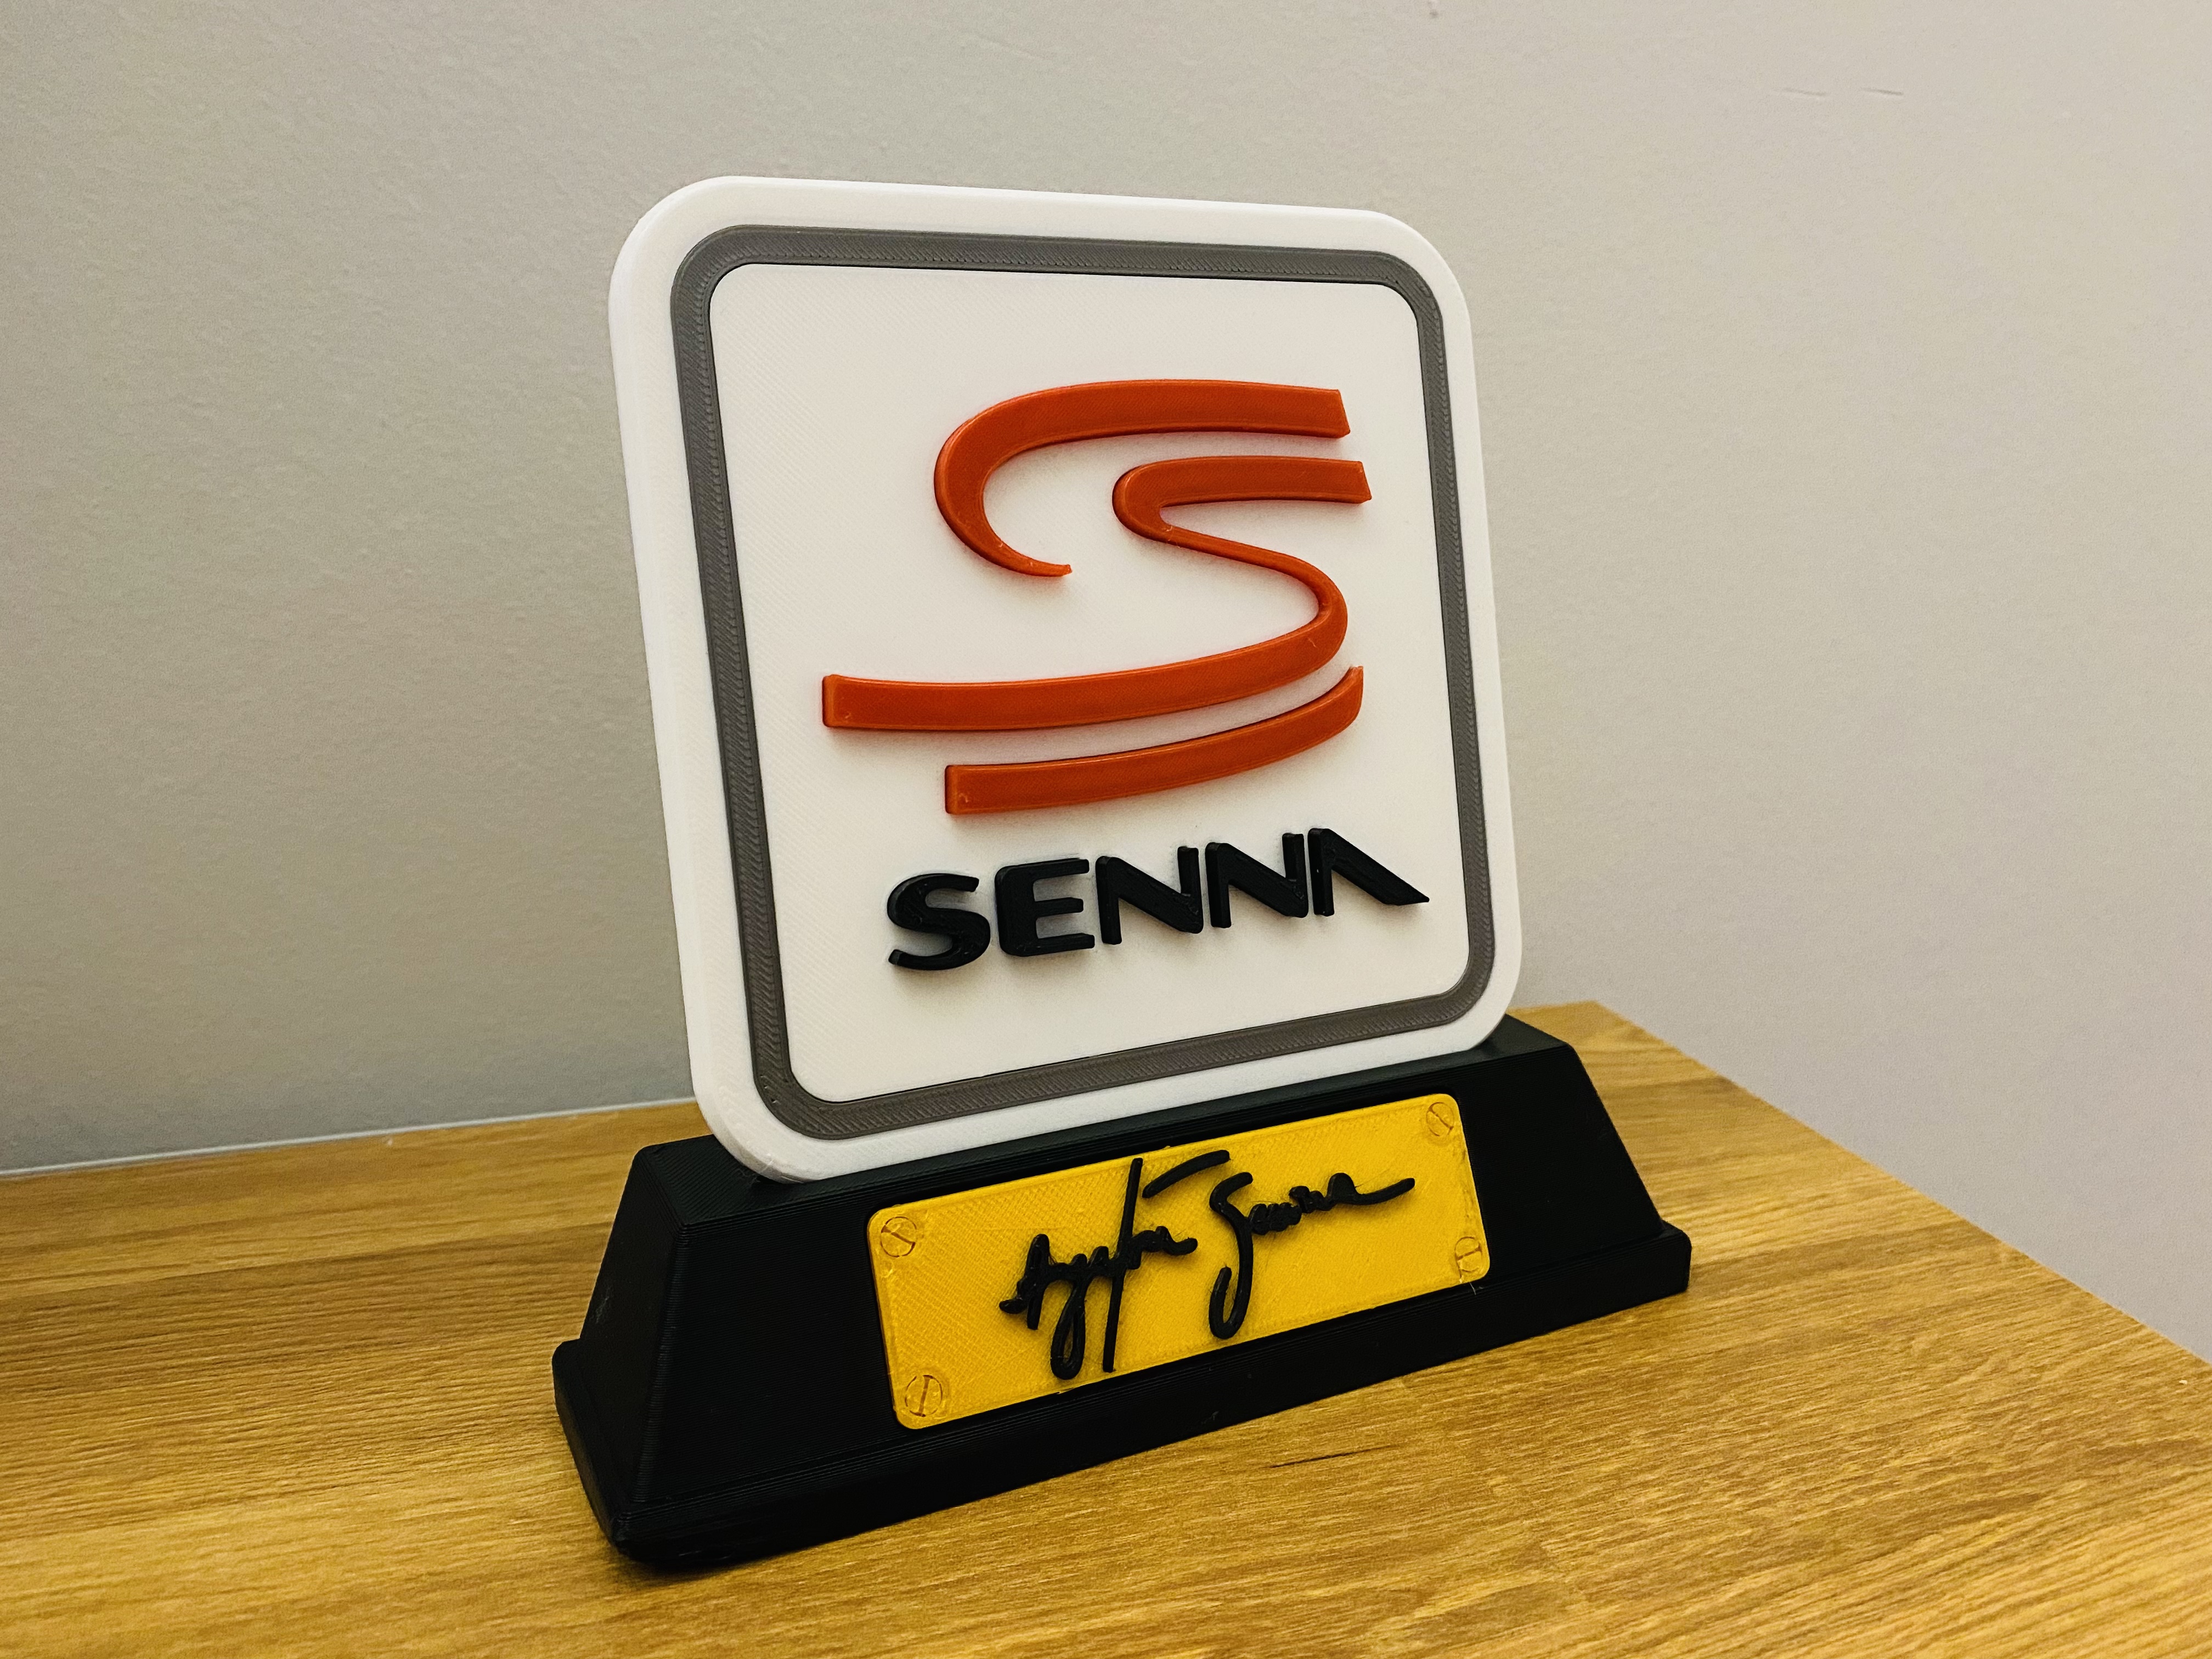 SENNA - In memory of the F1 legend